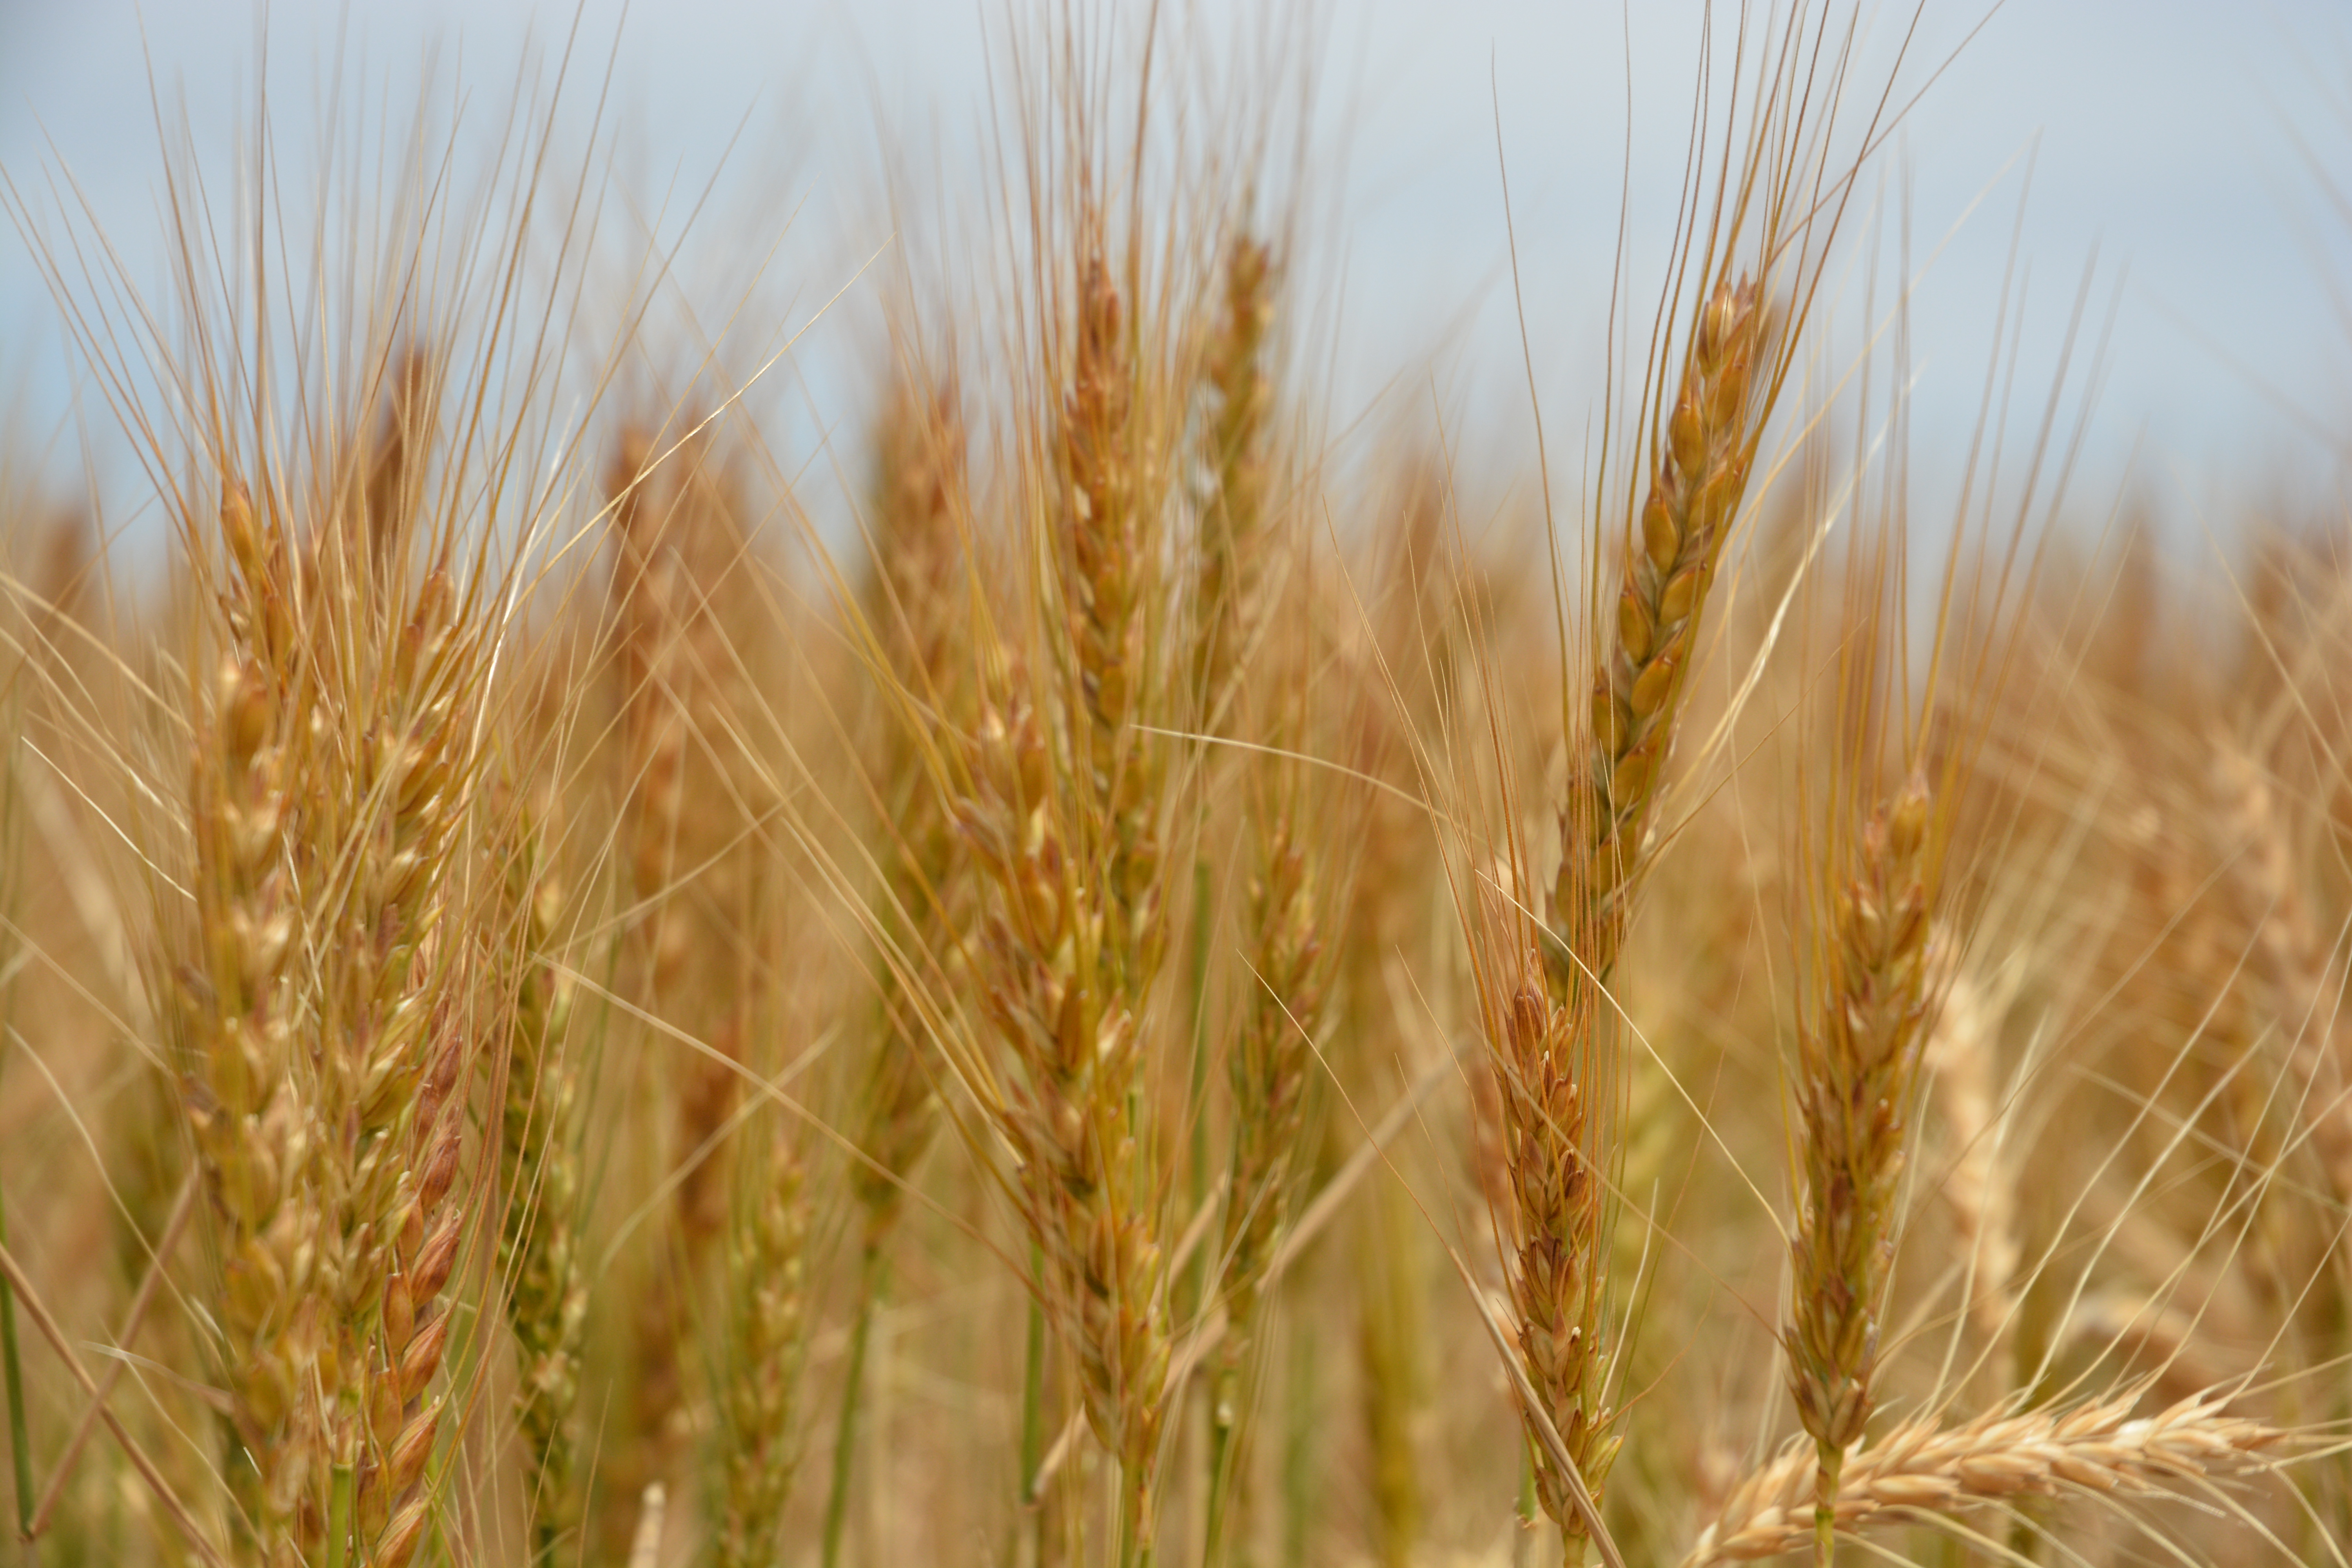 Expert cautious about plant growth regulators for wheat